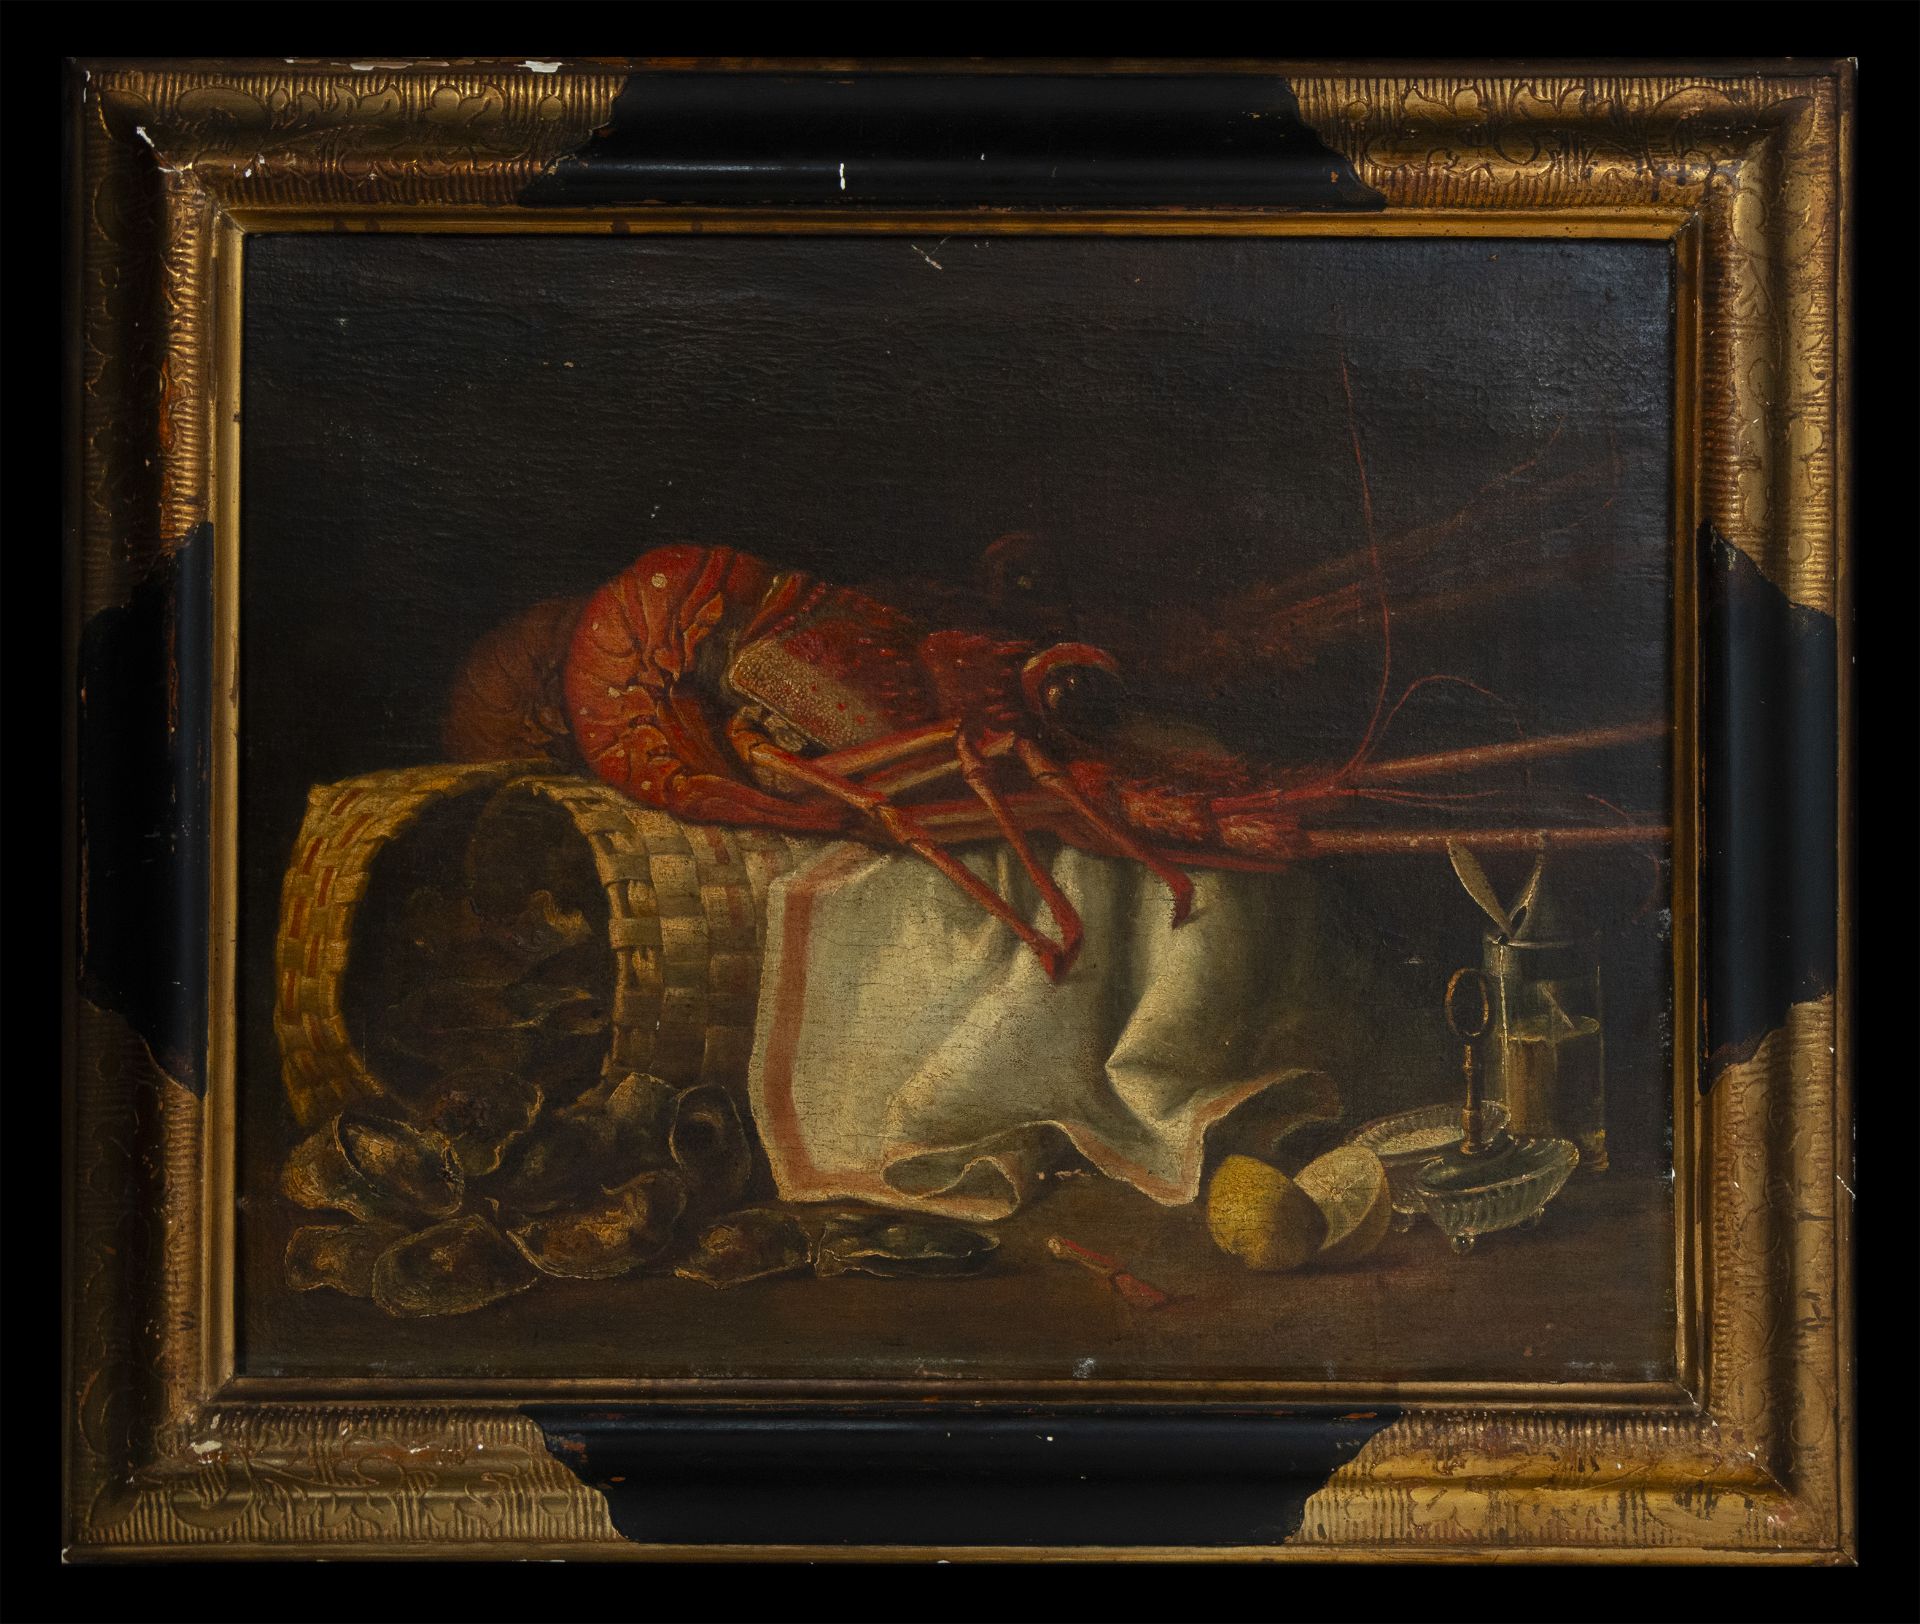 Pair of decorative Italian Lombard still lifes from the 18th century - Image 2 of 9